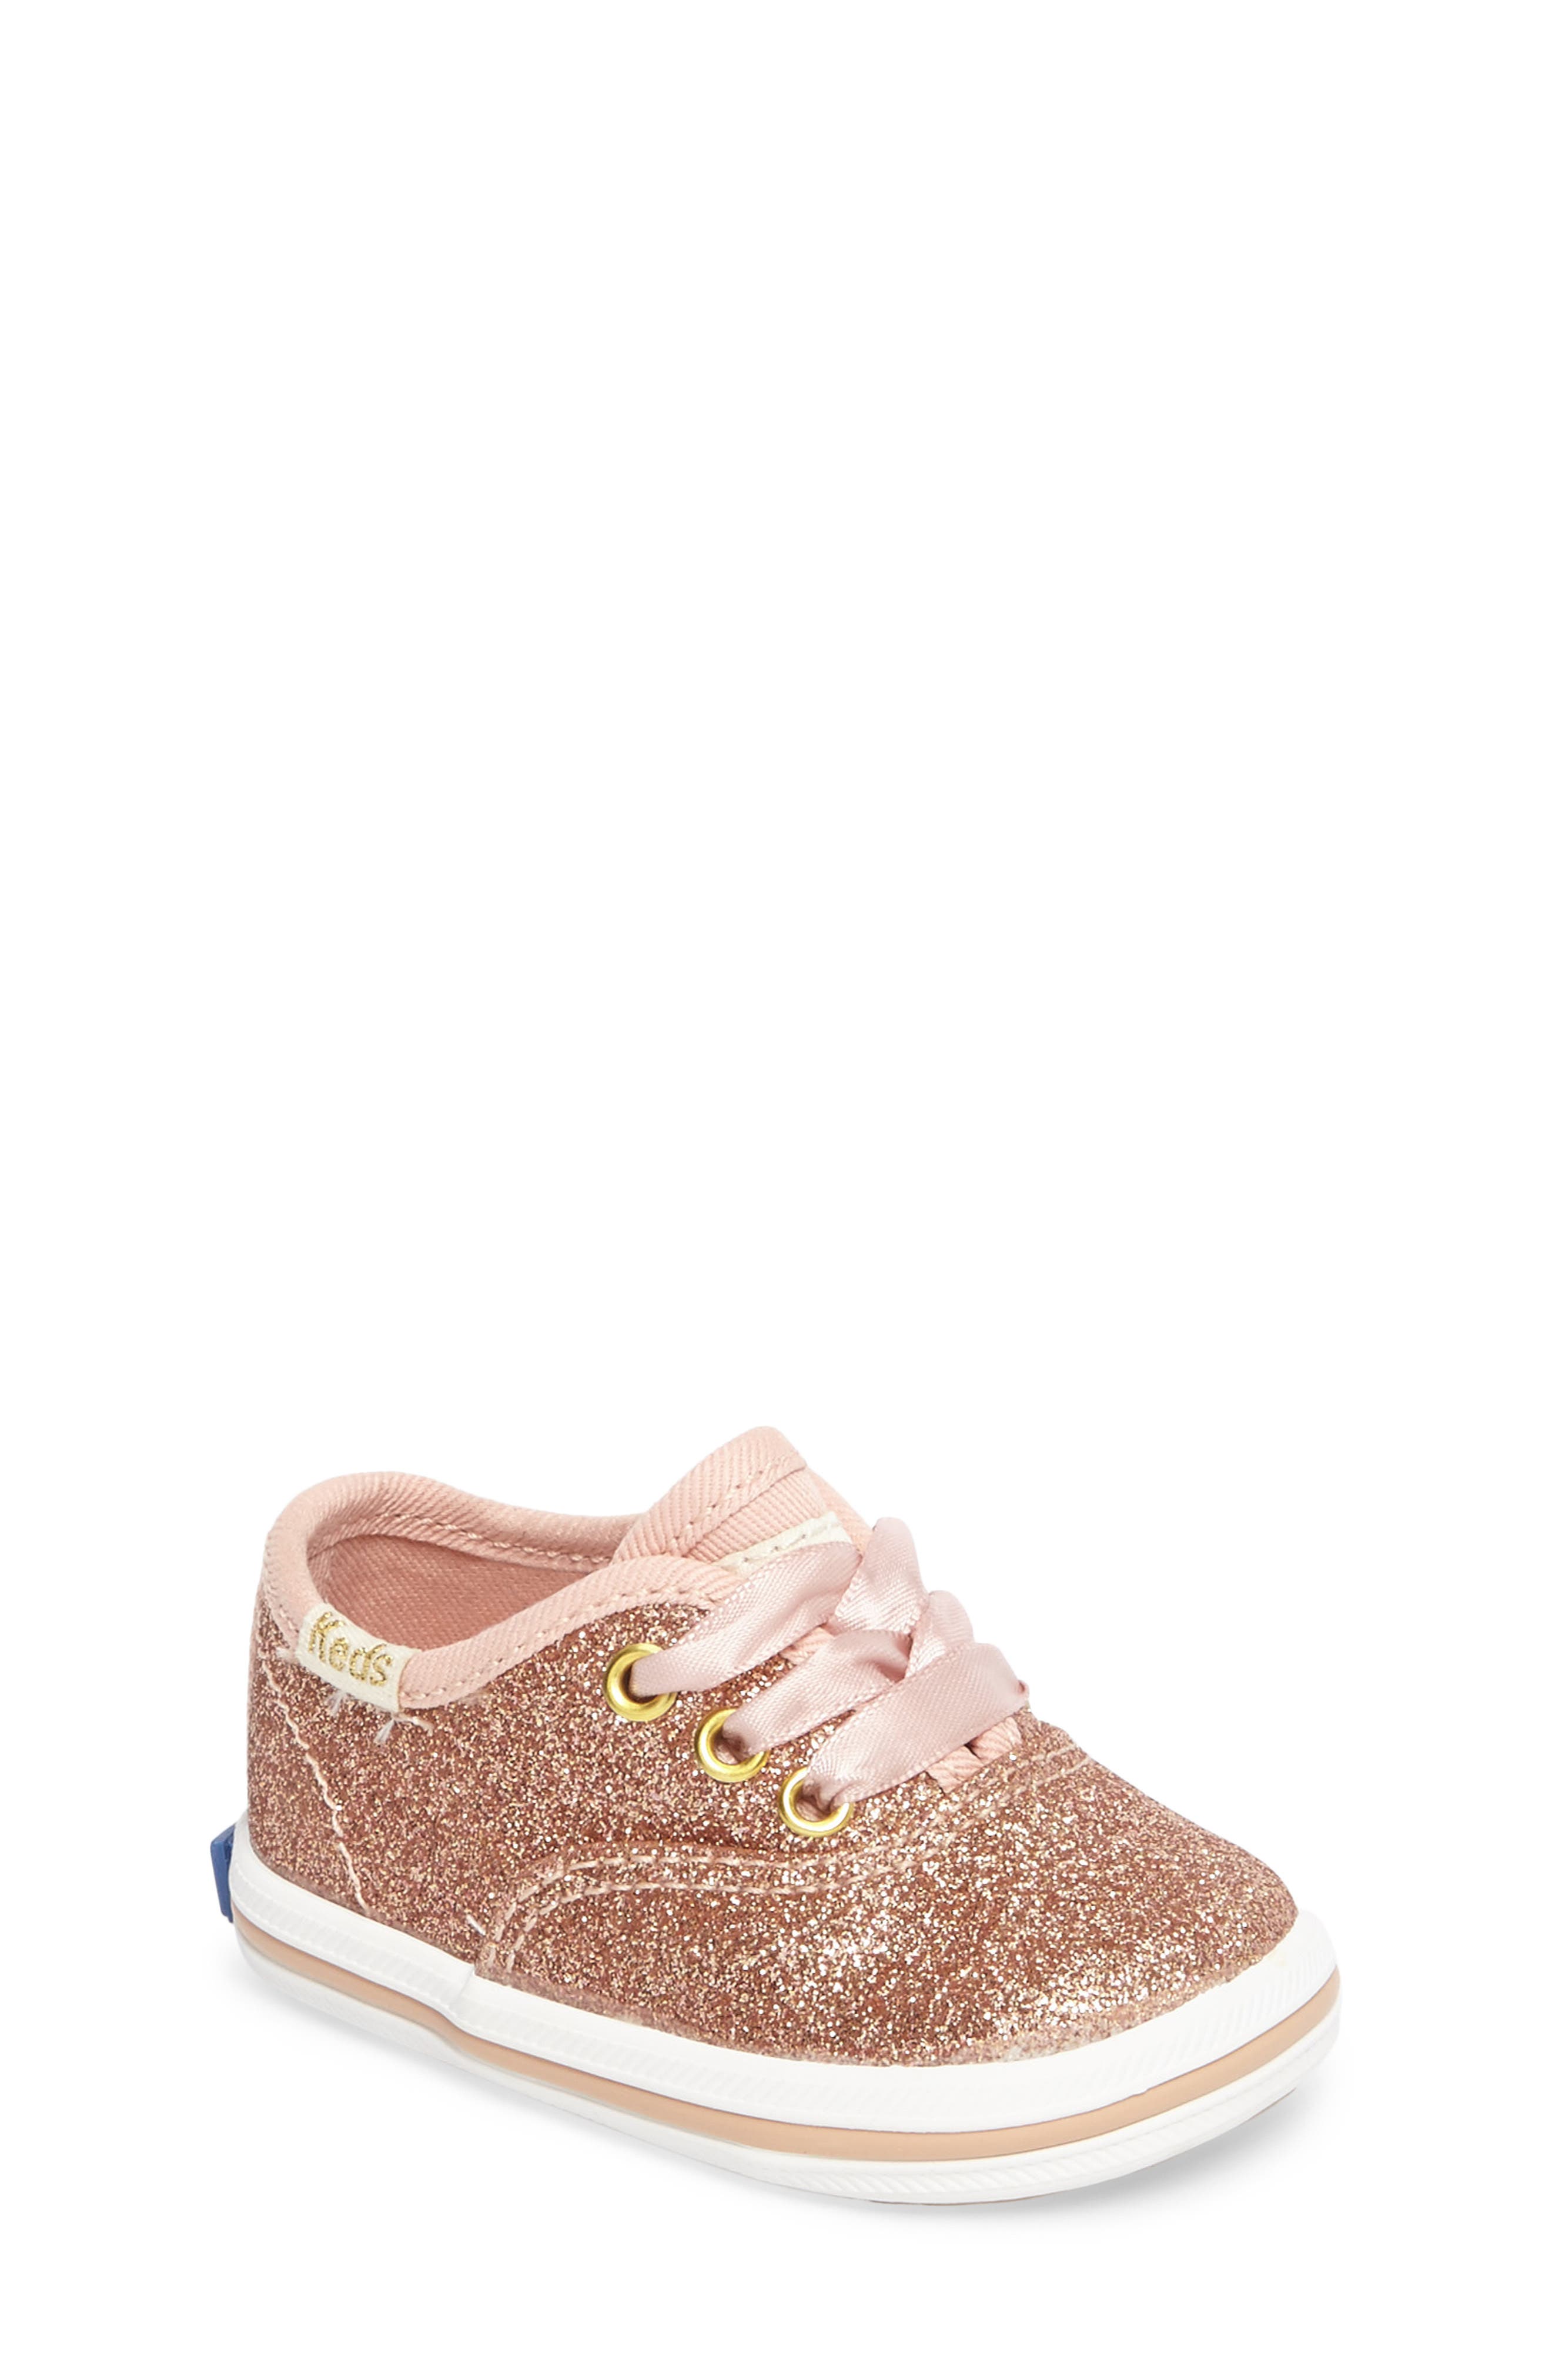 UPC 884401127272 product image for Keds(R) x kate spade new york Champion Glitter Crib Shoe in Rose Gold at  | upcitemdb.com